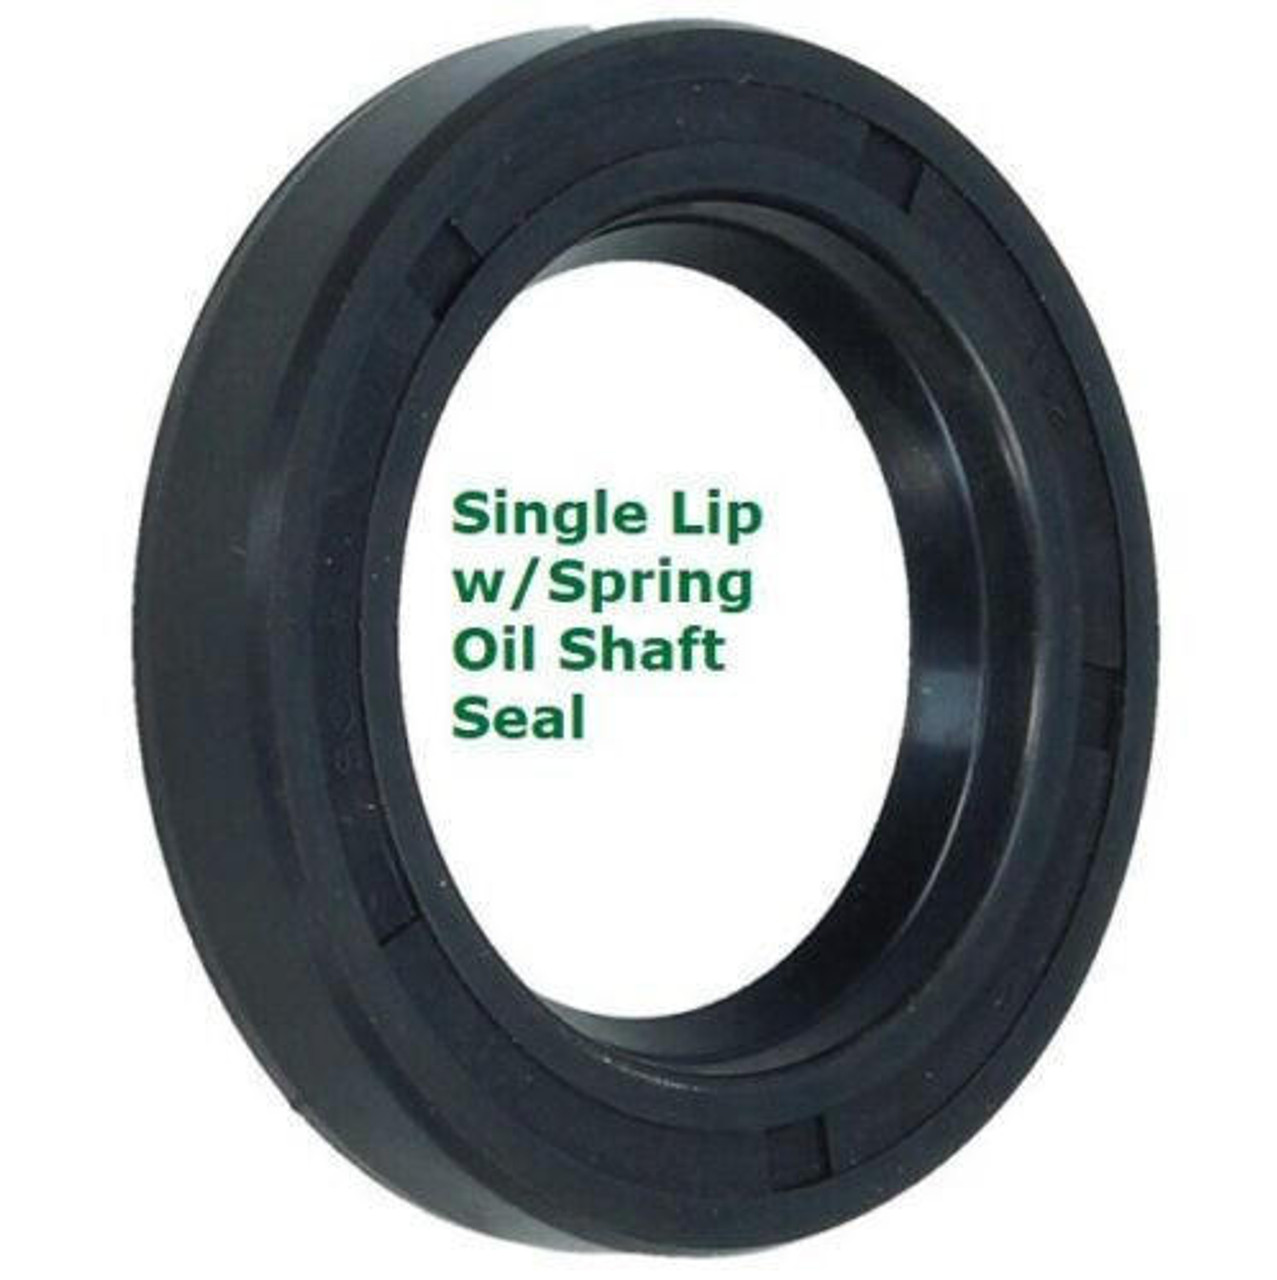 Metric Oil Shaft Seal 140 x 170 x 13mm   Price for 1 pc